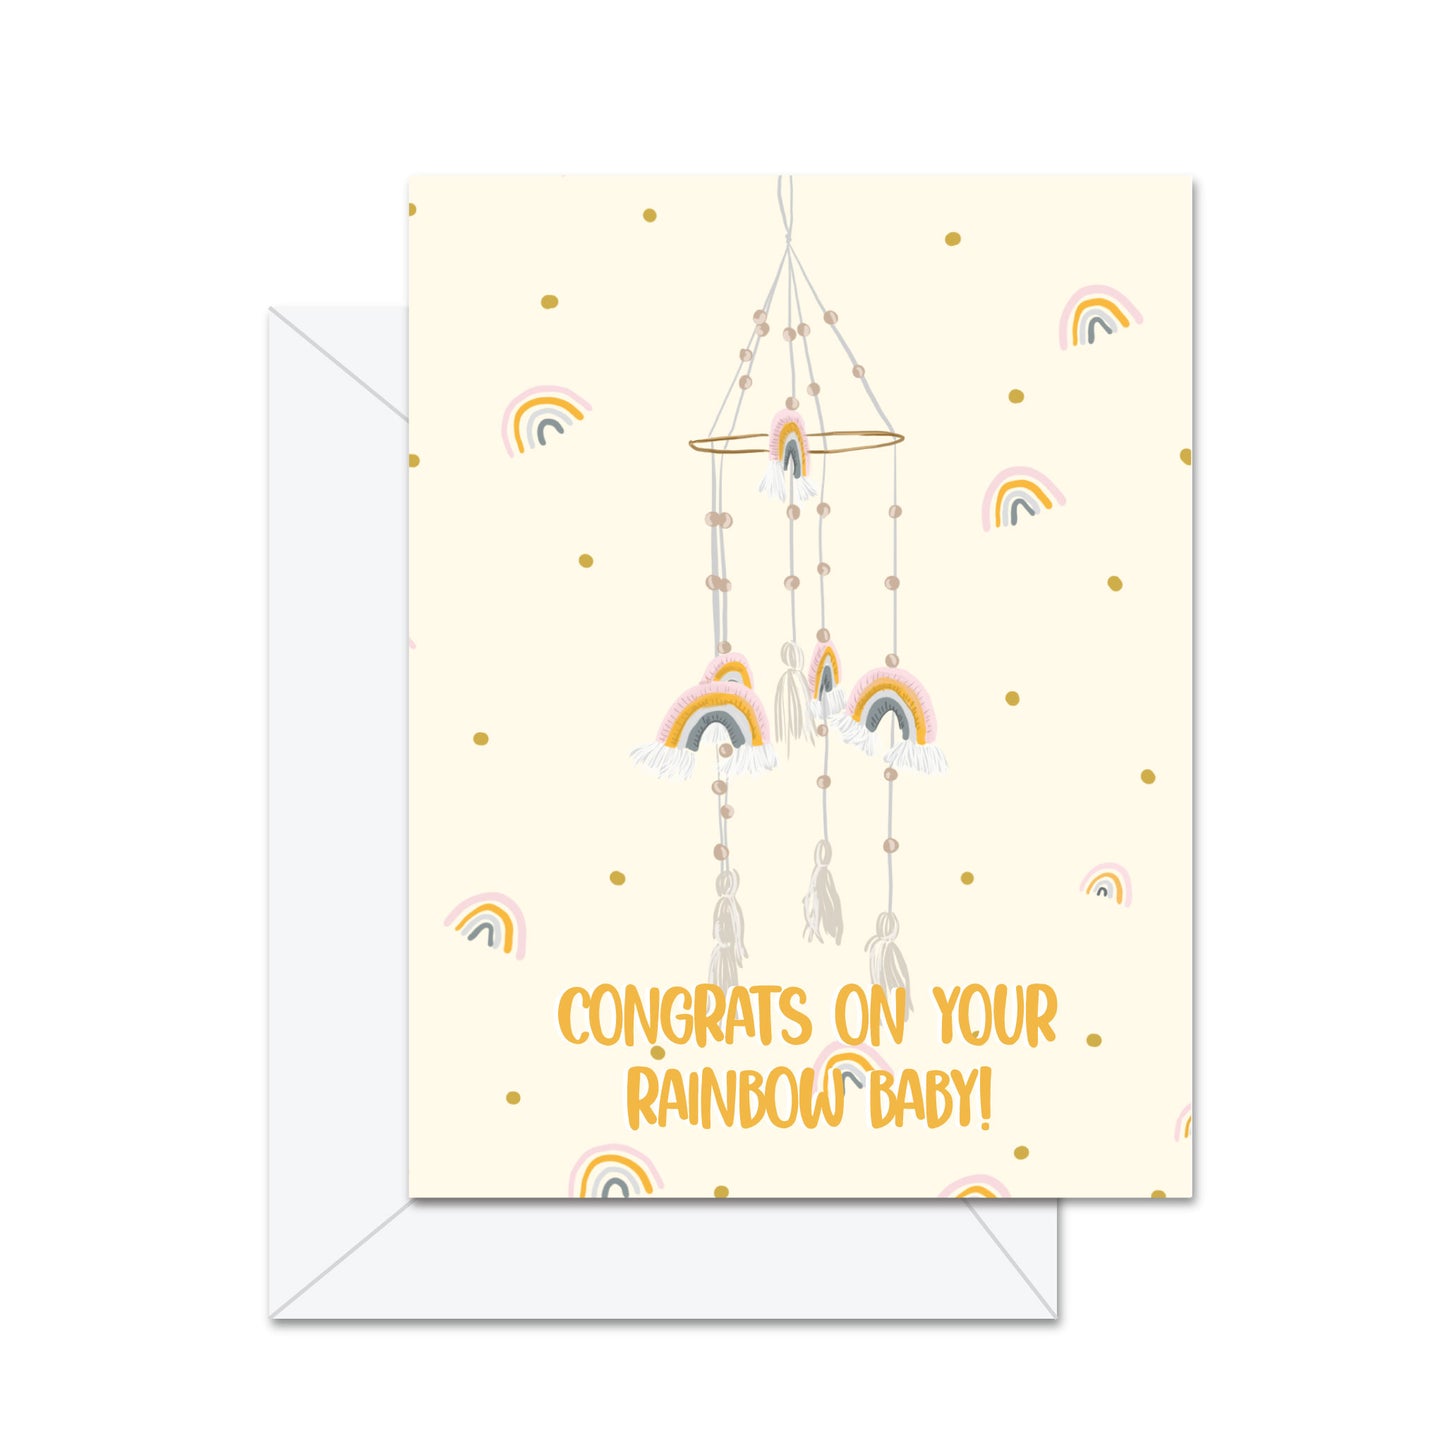 Congrats On Your Rainbow Baby - Greeting Card